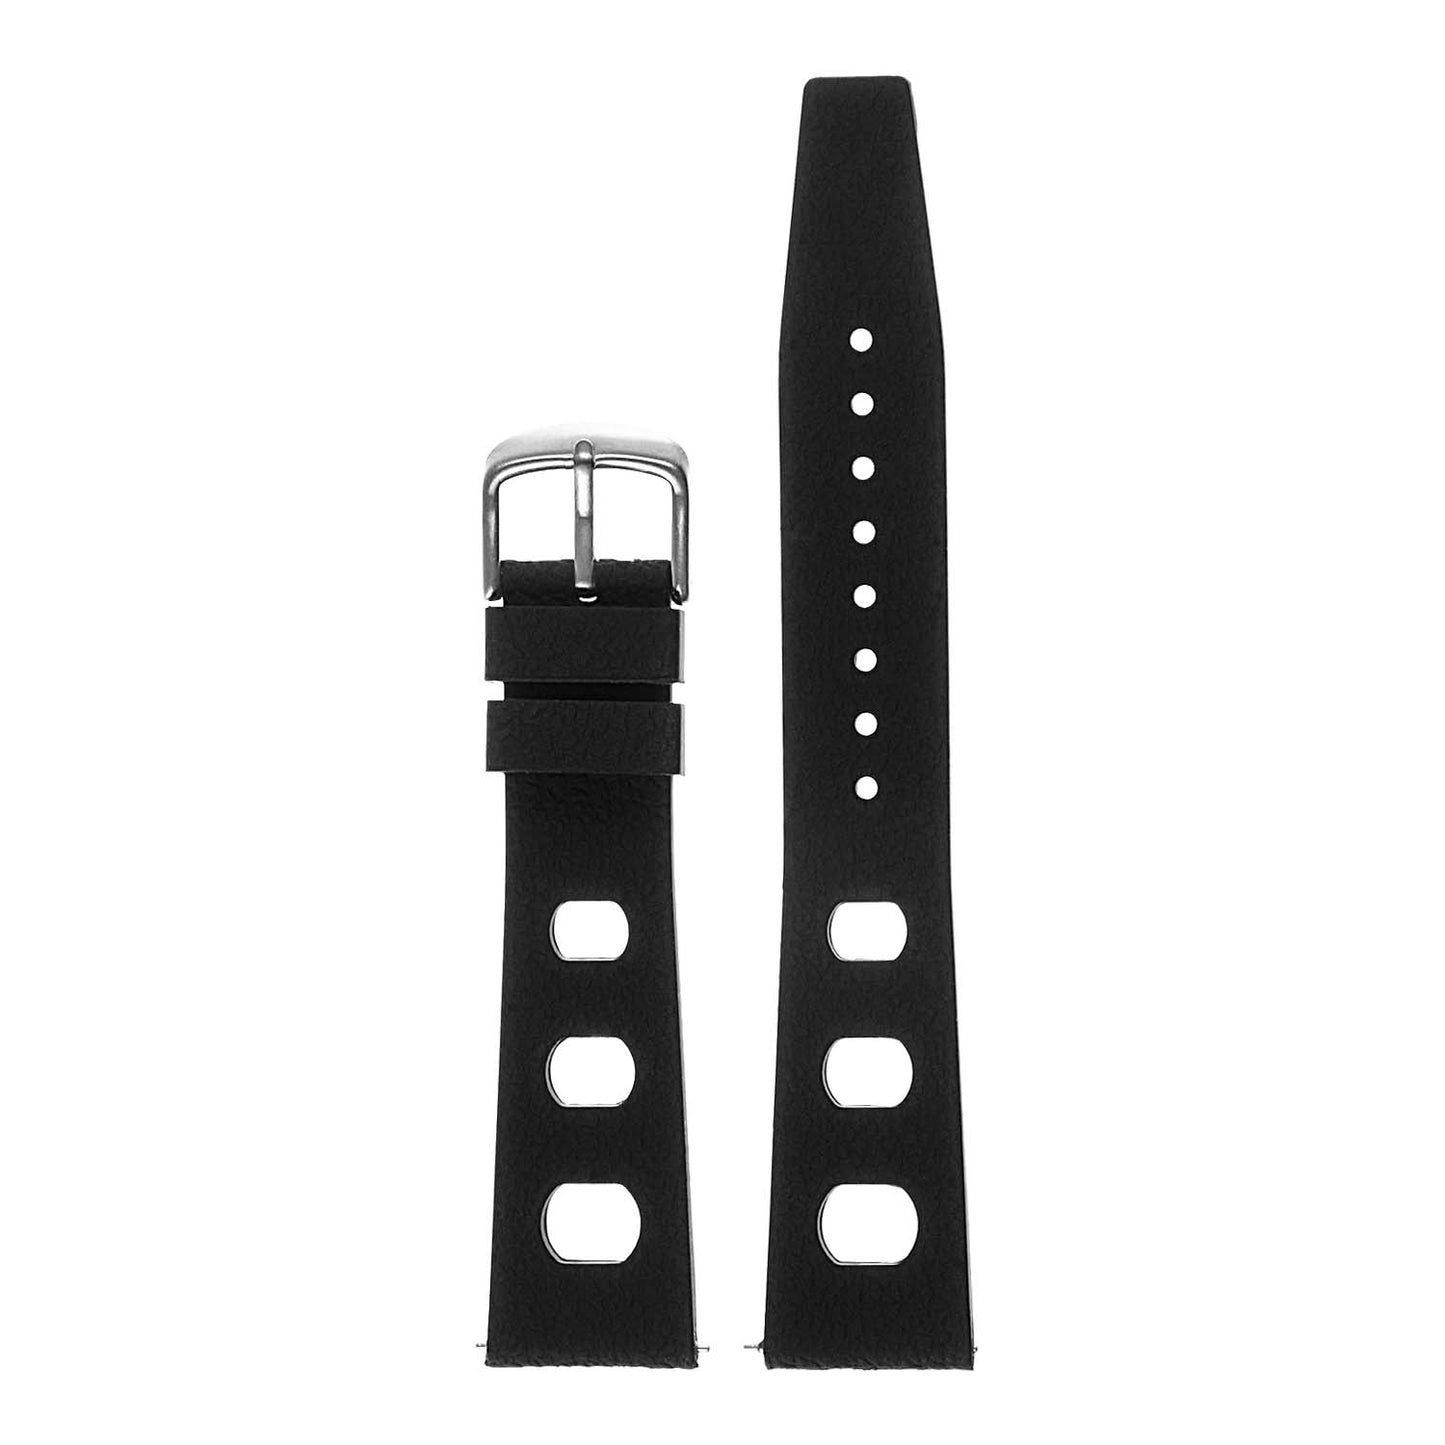 Vintage Style Rubber Rally Strap for Samsung Galaxy Watch 3